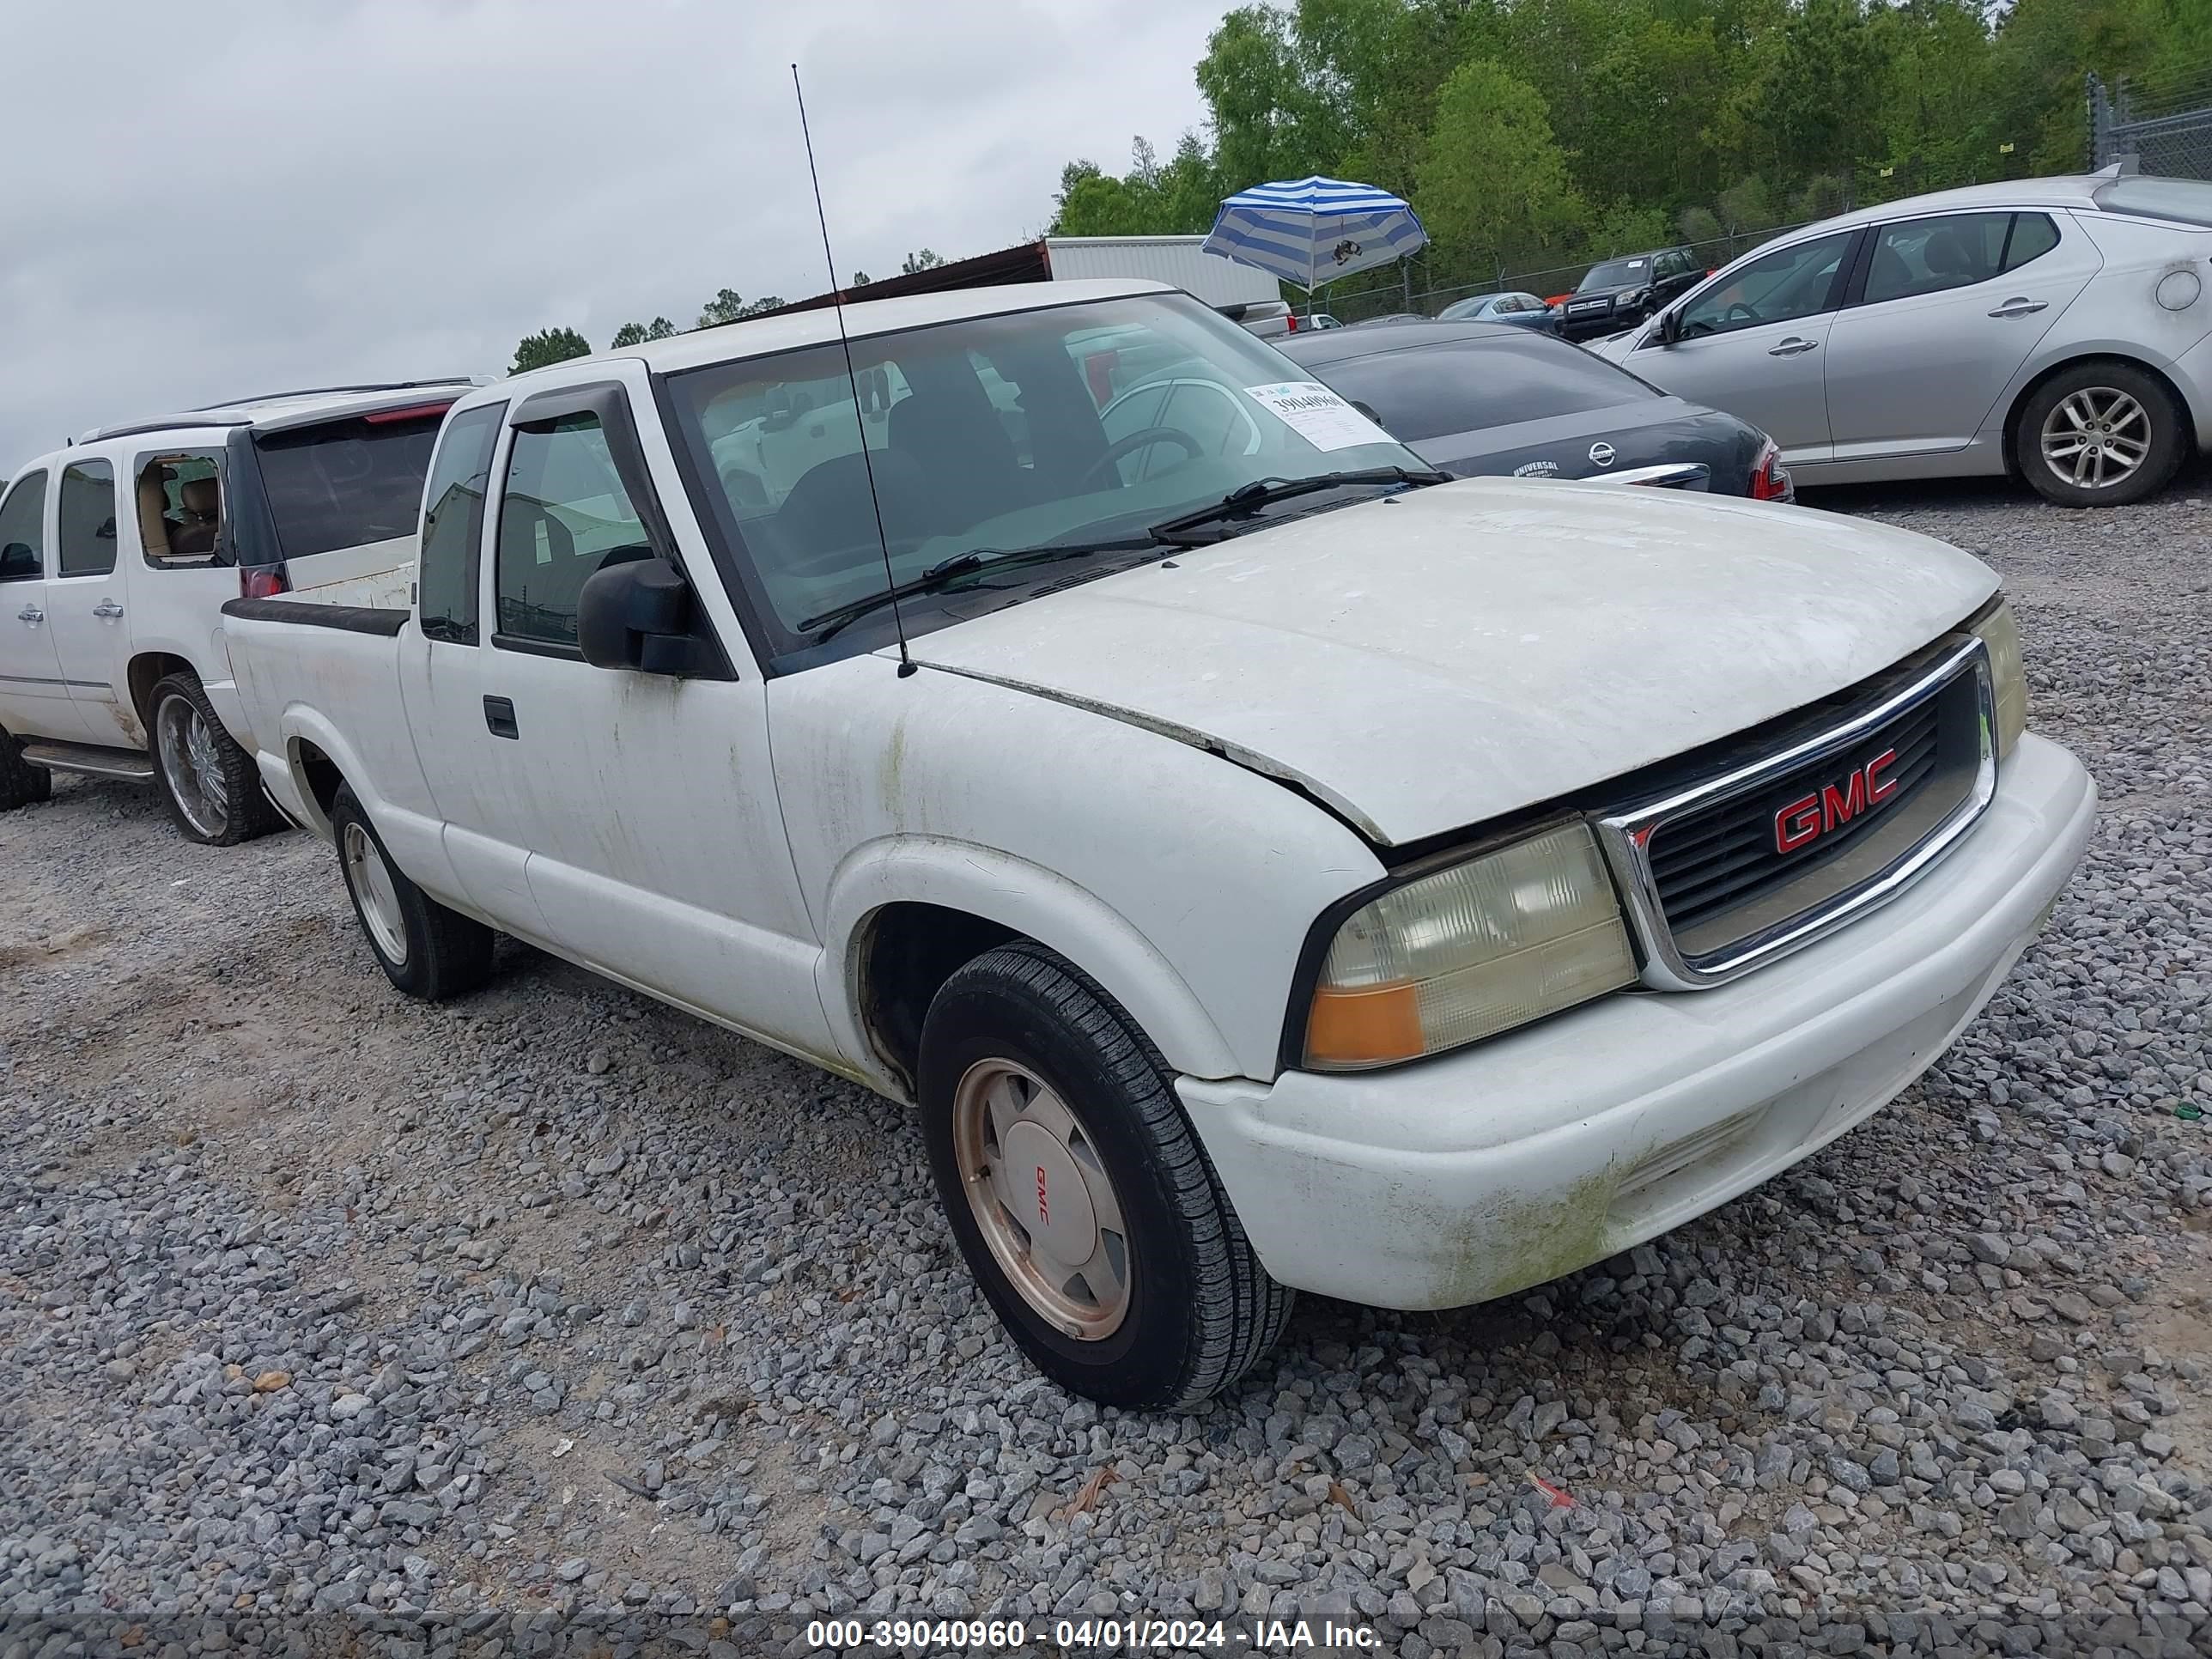 vin: 1GTCS19XX38277189 1GTCS19XX38277189 2003 gmc sonoma 4300 for Sale in 39562, 8209 Old Stage Rd, Moss Point, Mississippi, USA